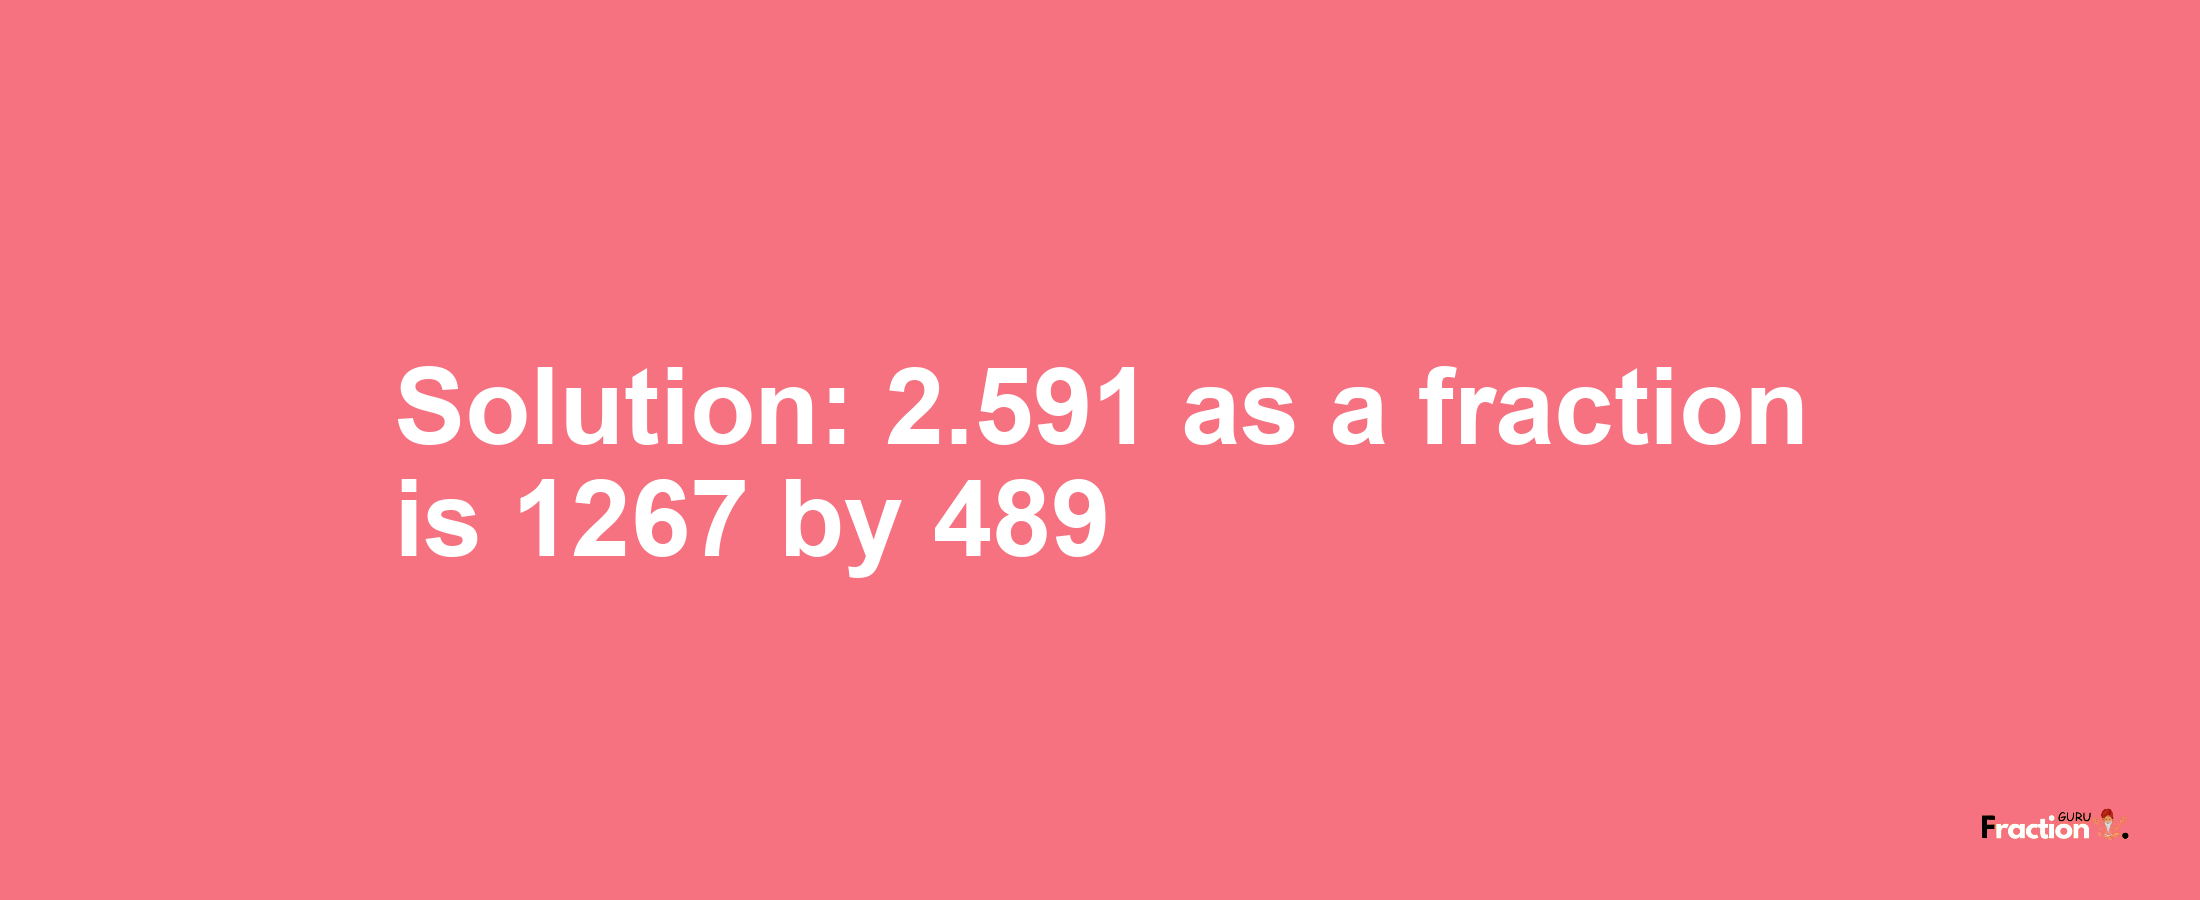 Solution:2.591 as a fraction is 1267/489